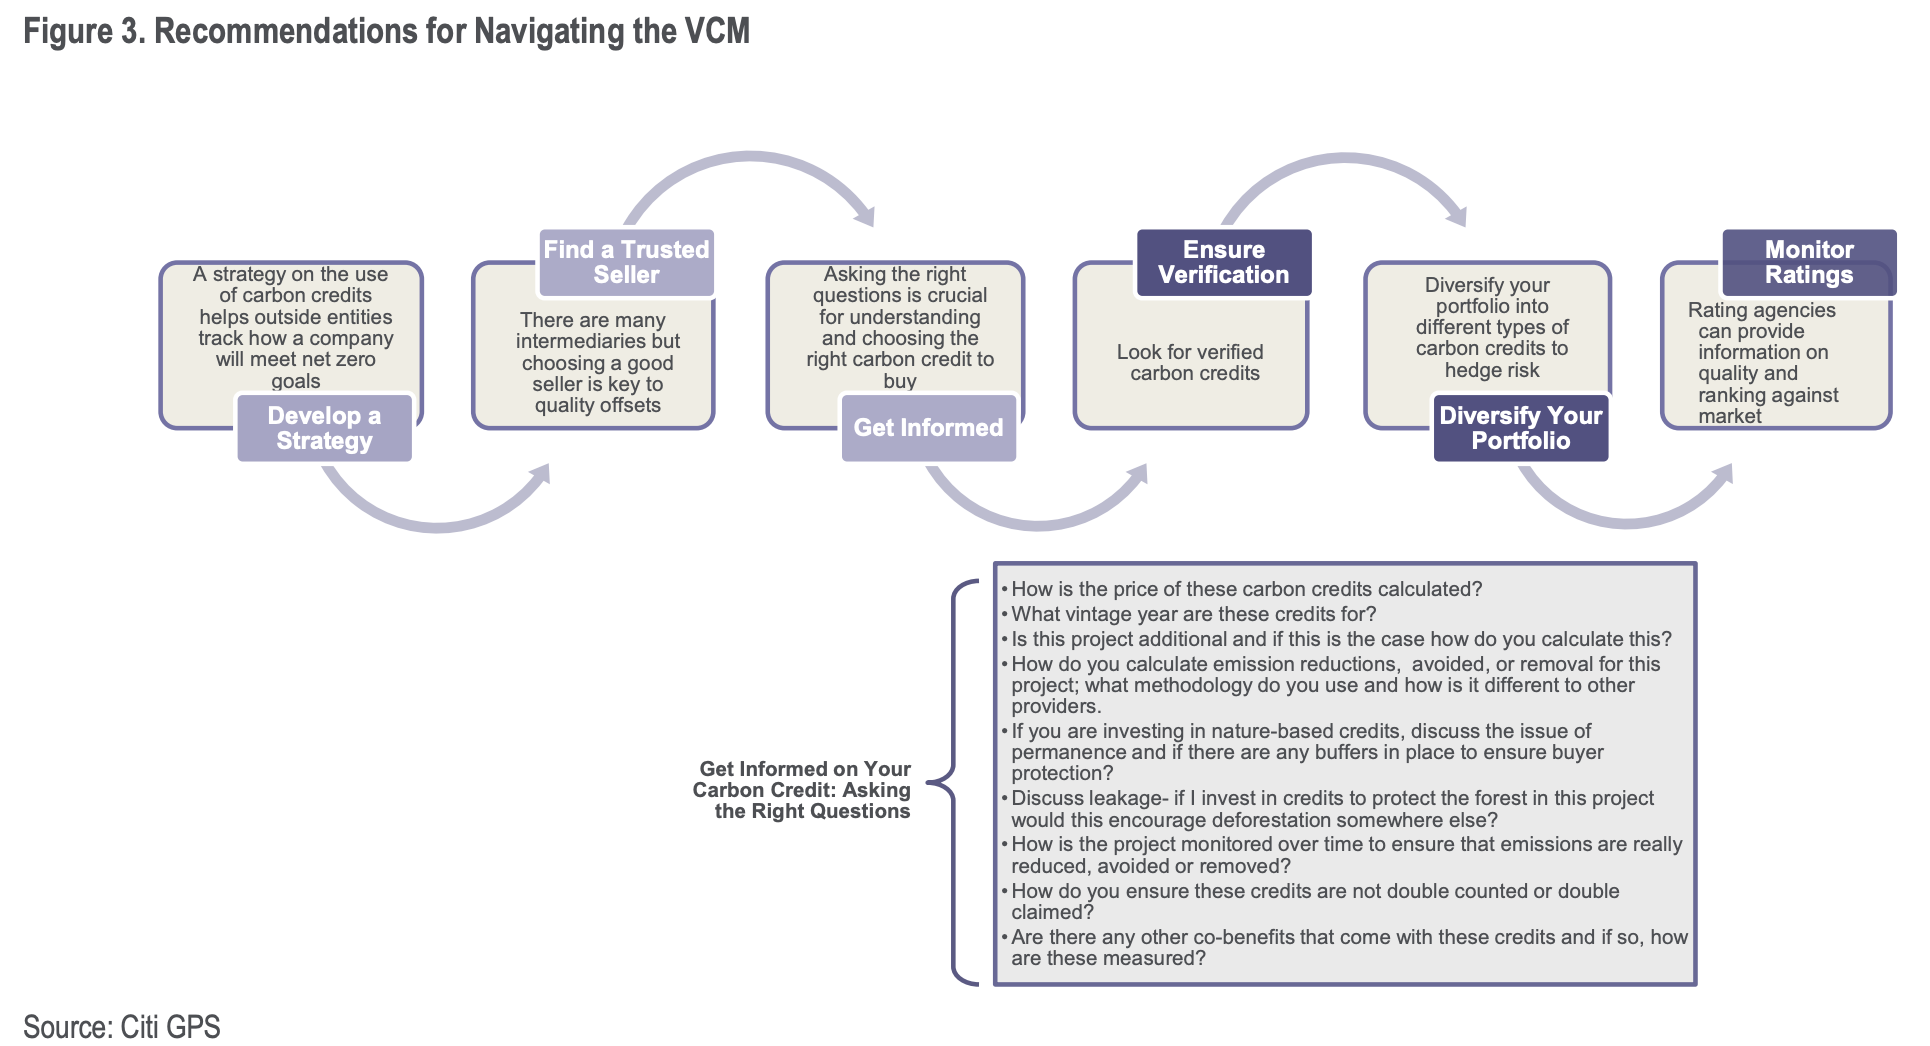 Recommendations for buyers to navigate the VCM by Citi GPS. The high number of intermediaries, such as trusted sellers, due diligence experts and advisors, or carbon registries introduces significant inefficiencies and coordination challenges to the carbon value chain. Source: Graphic (https://www.citigroup.com/global/insights/citigps/voluntary-carbon-market) by Citi GPS used under a fair use rationale.